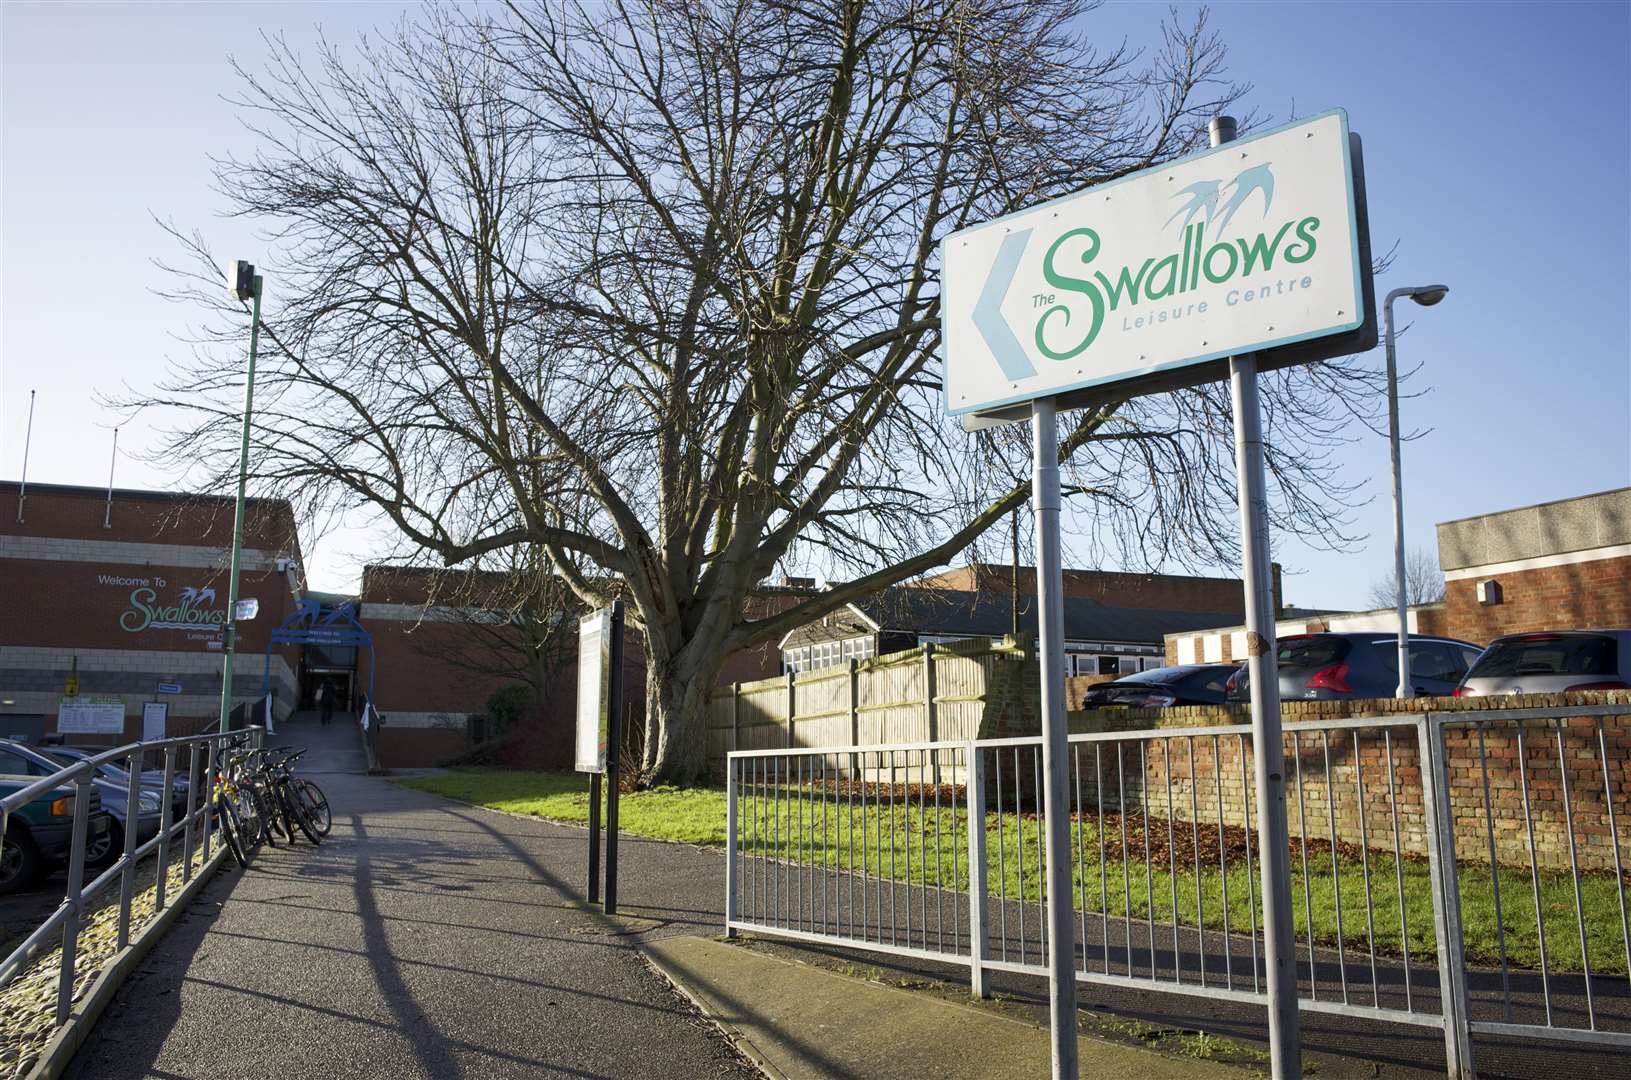 A multi-million pound refurbishment is taking place at Swallows in Sittingbourne